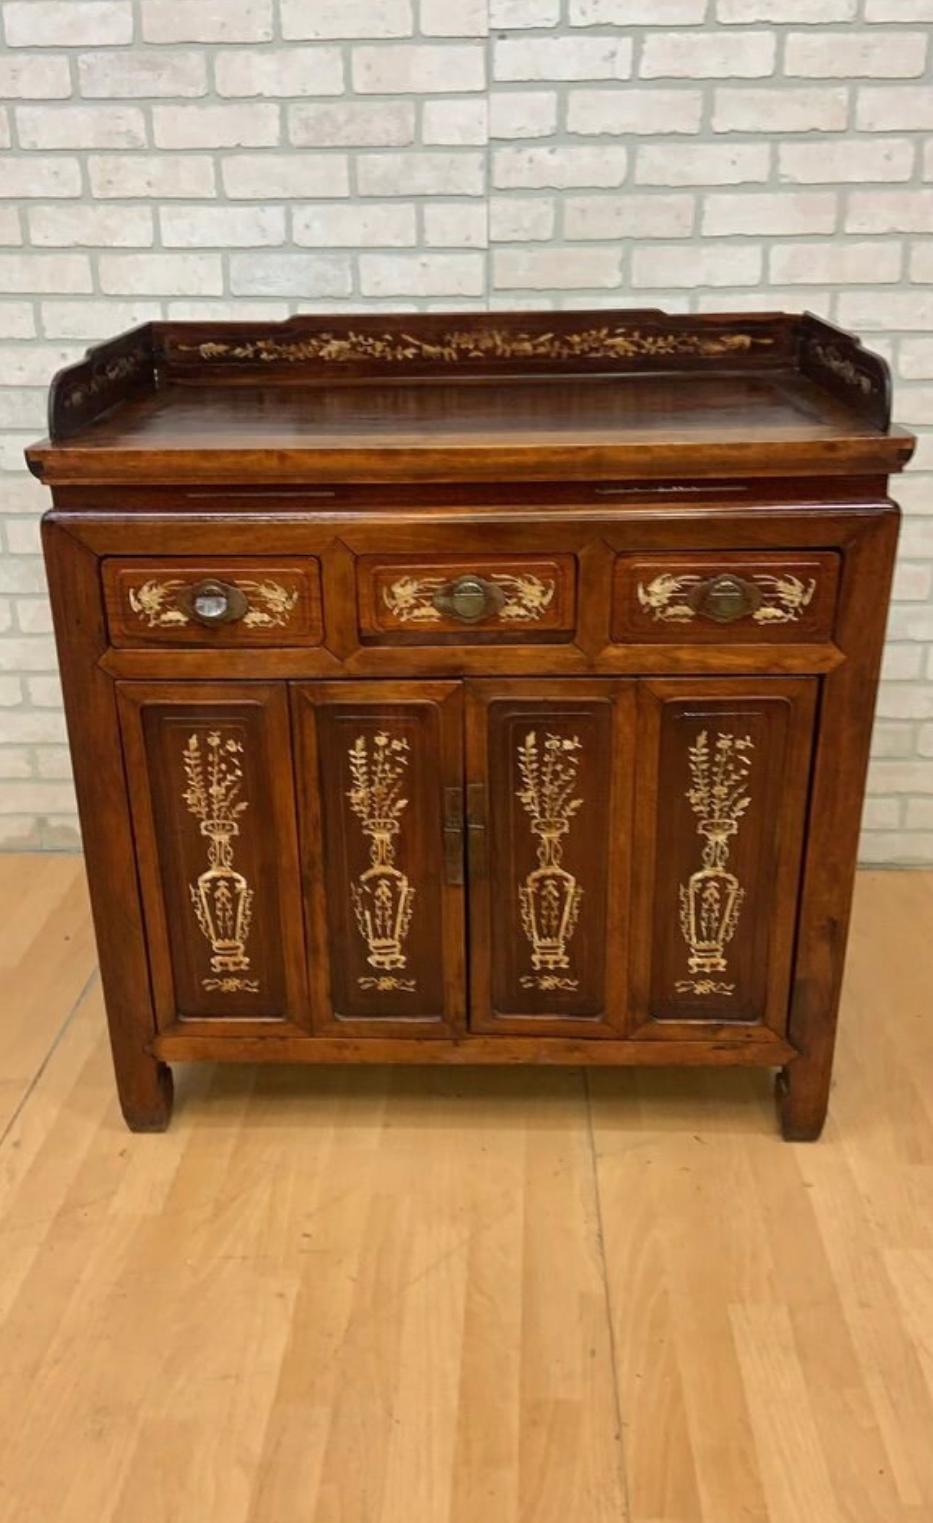 Antique Chinese Jiangsu Province Rosewood with Bone Inlay Sideboard Cabinet

Exceptional 1800's Chinese Jiangsu province cabinet with bone inlay, beautifully crafted from rosewood and nanmu wood. The drawers and doors of this antique sideboard are